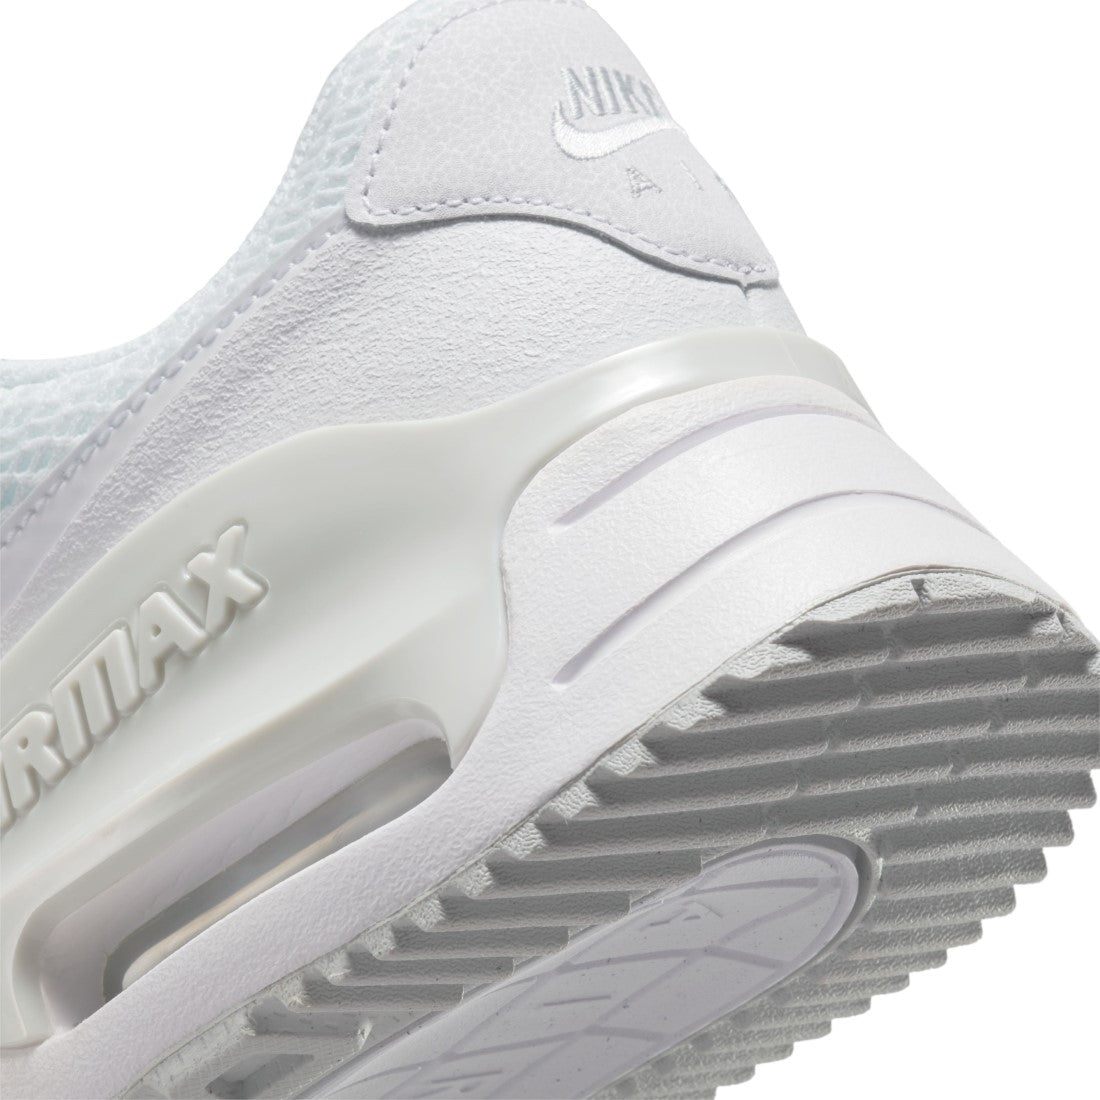 Air Max SYSTM Lifestyle Shoes